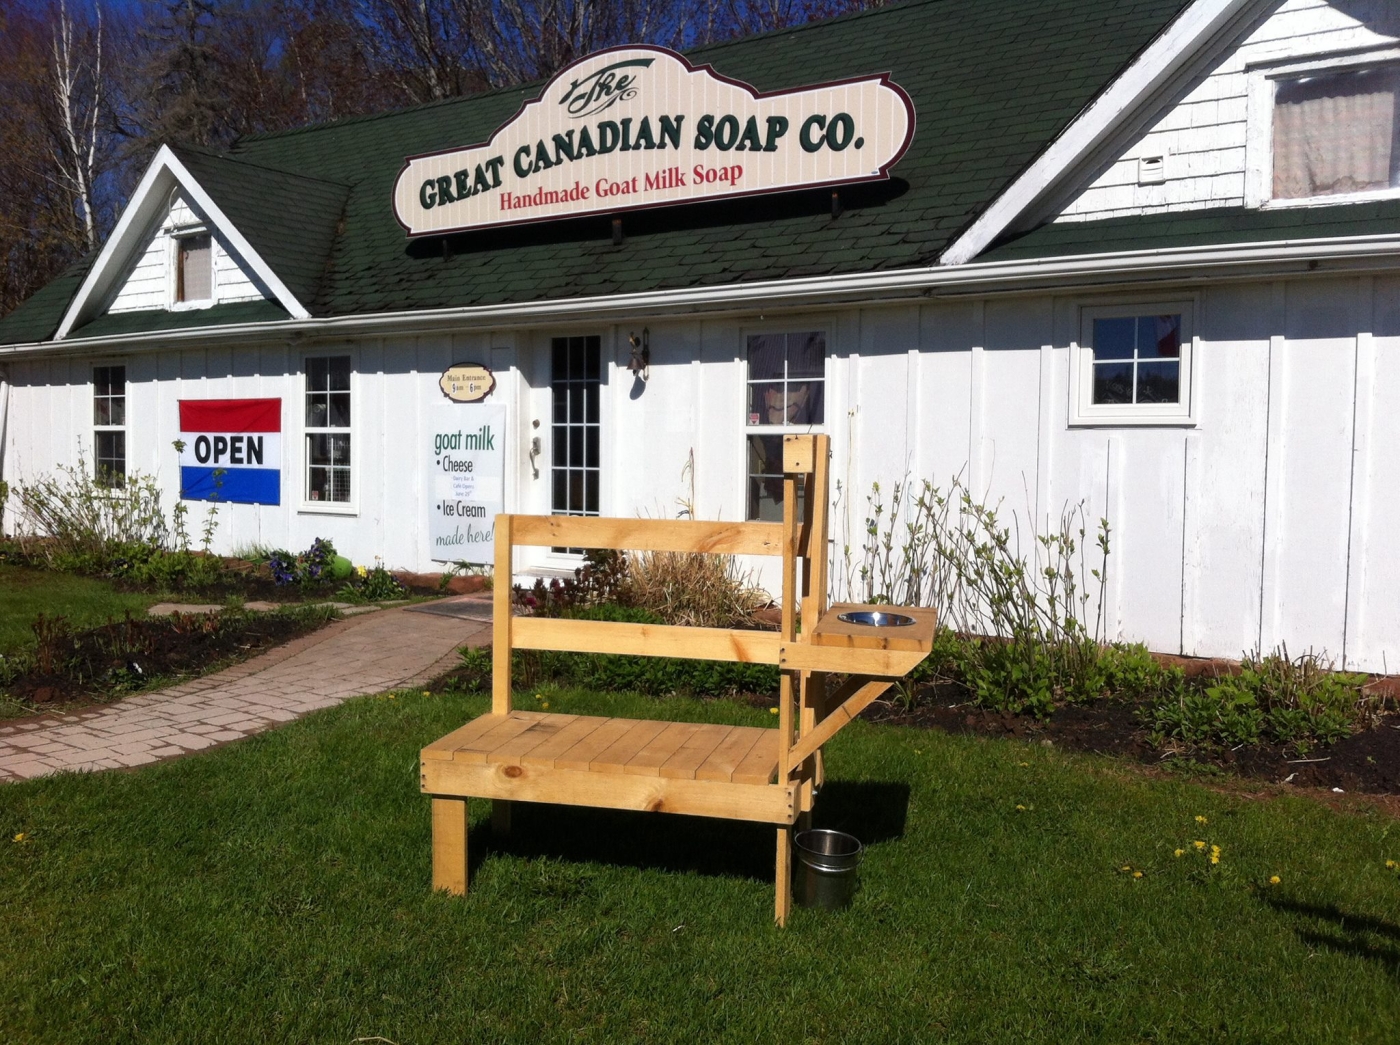 Exterior view of Great Canadian Soap Co. retail store